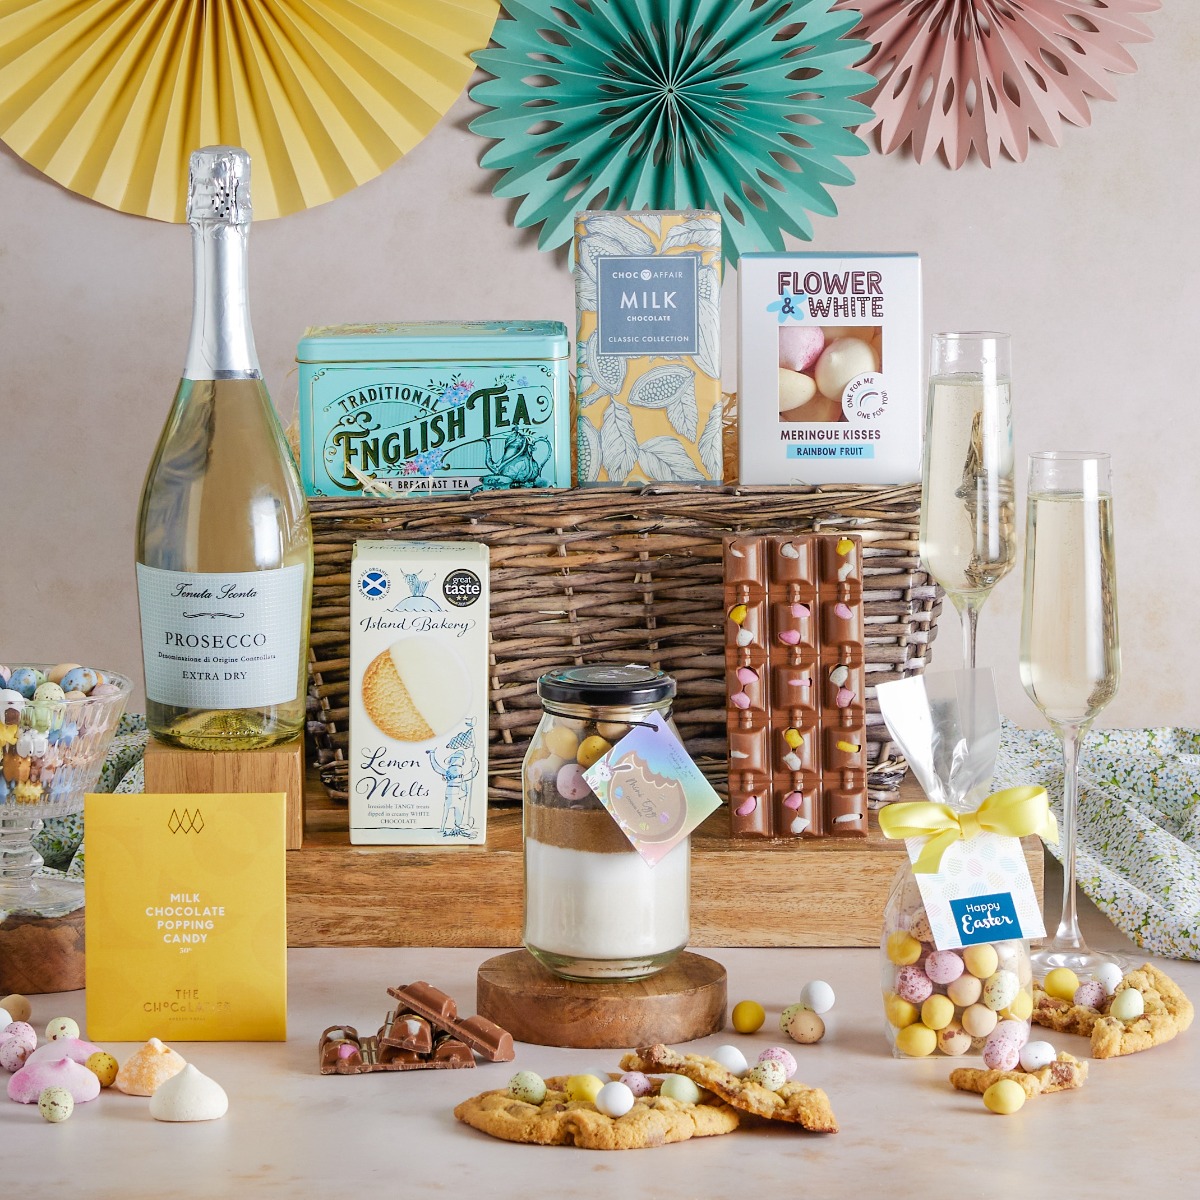 Easter Treats Basket with Prosecco and sweet treats on display